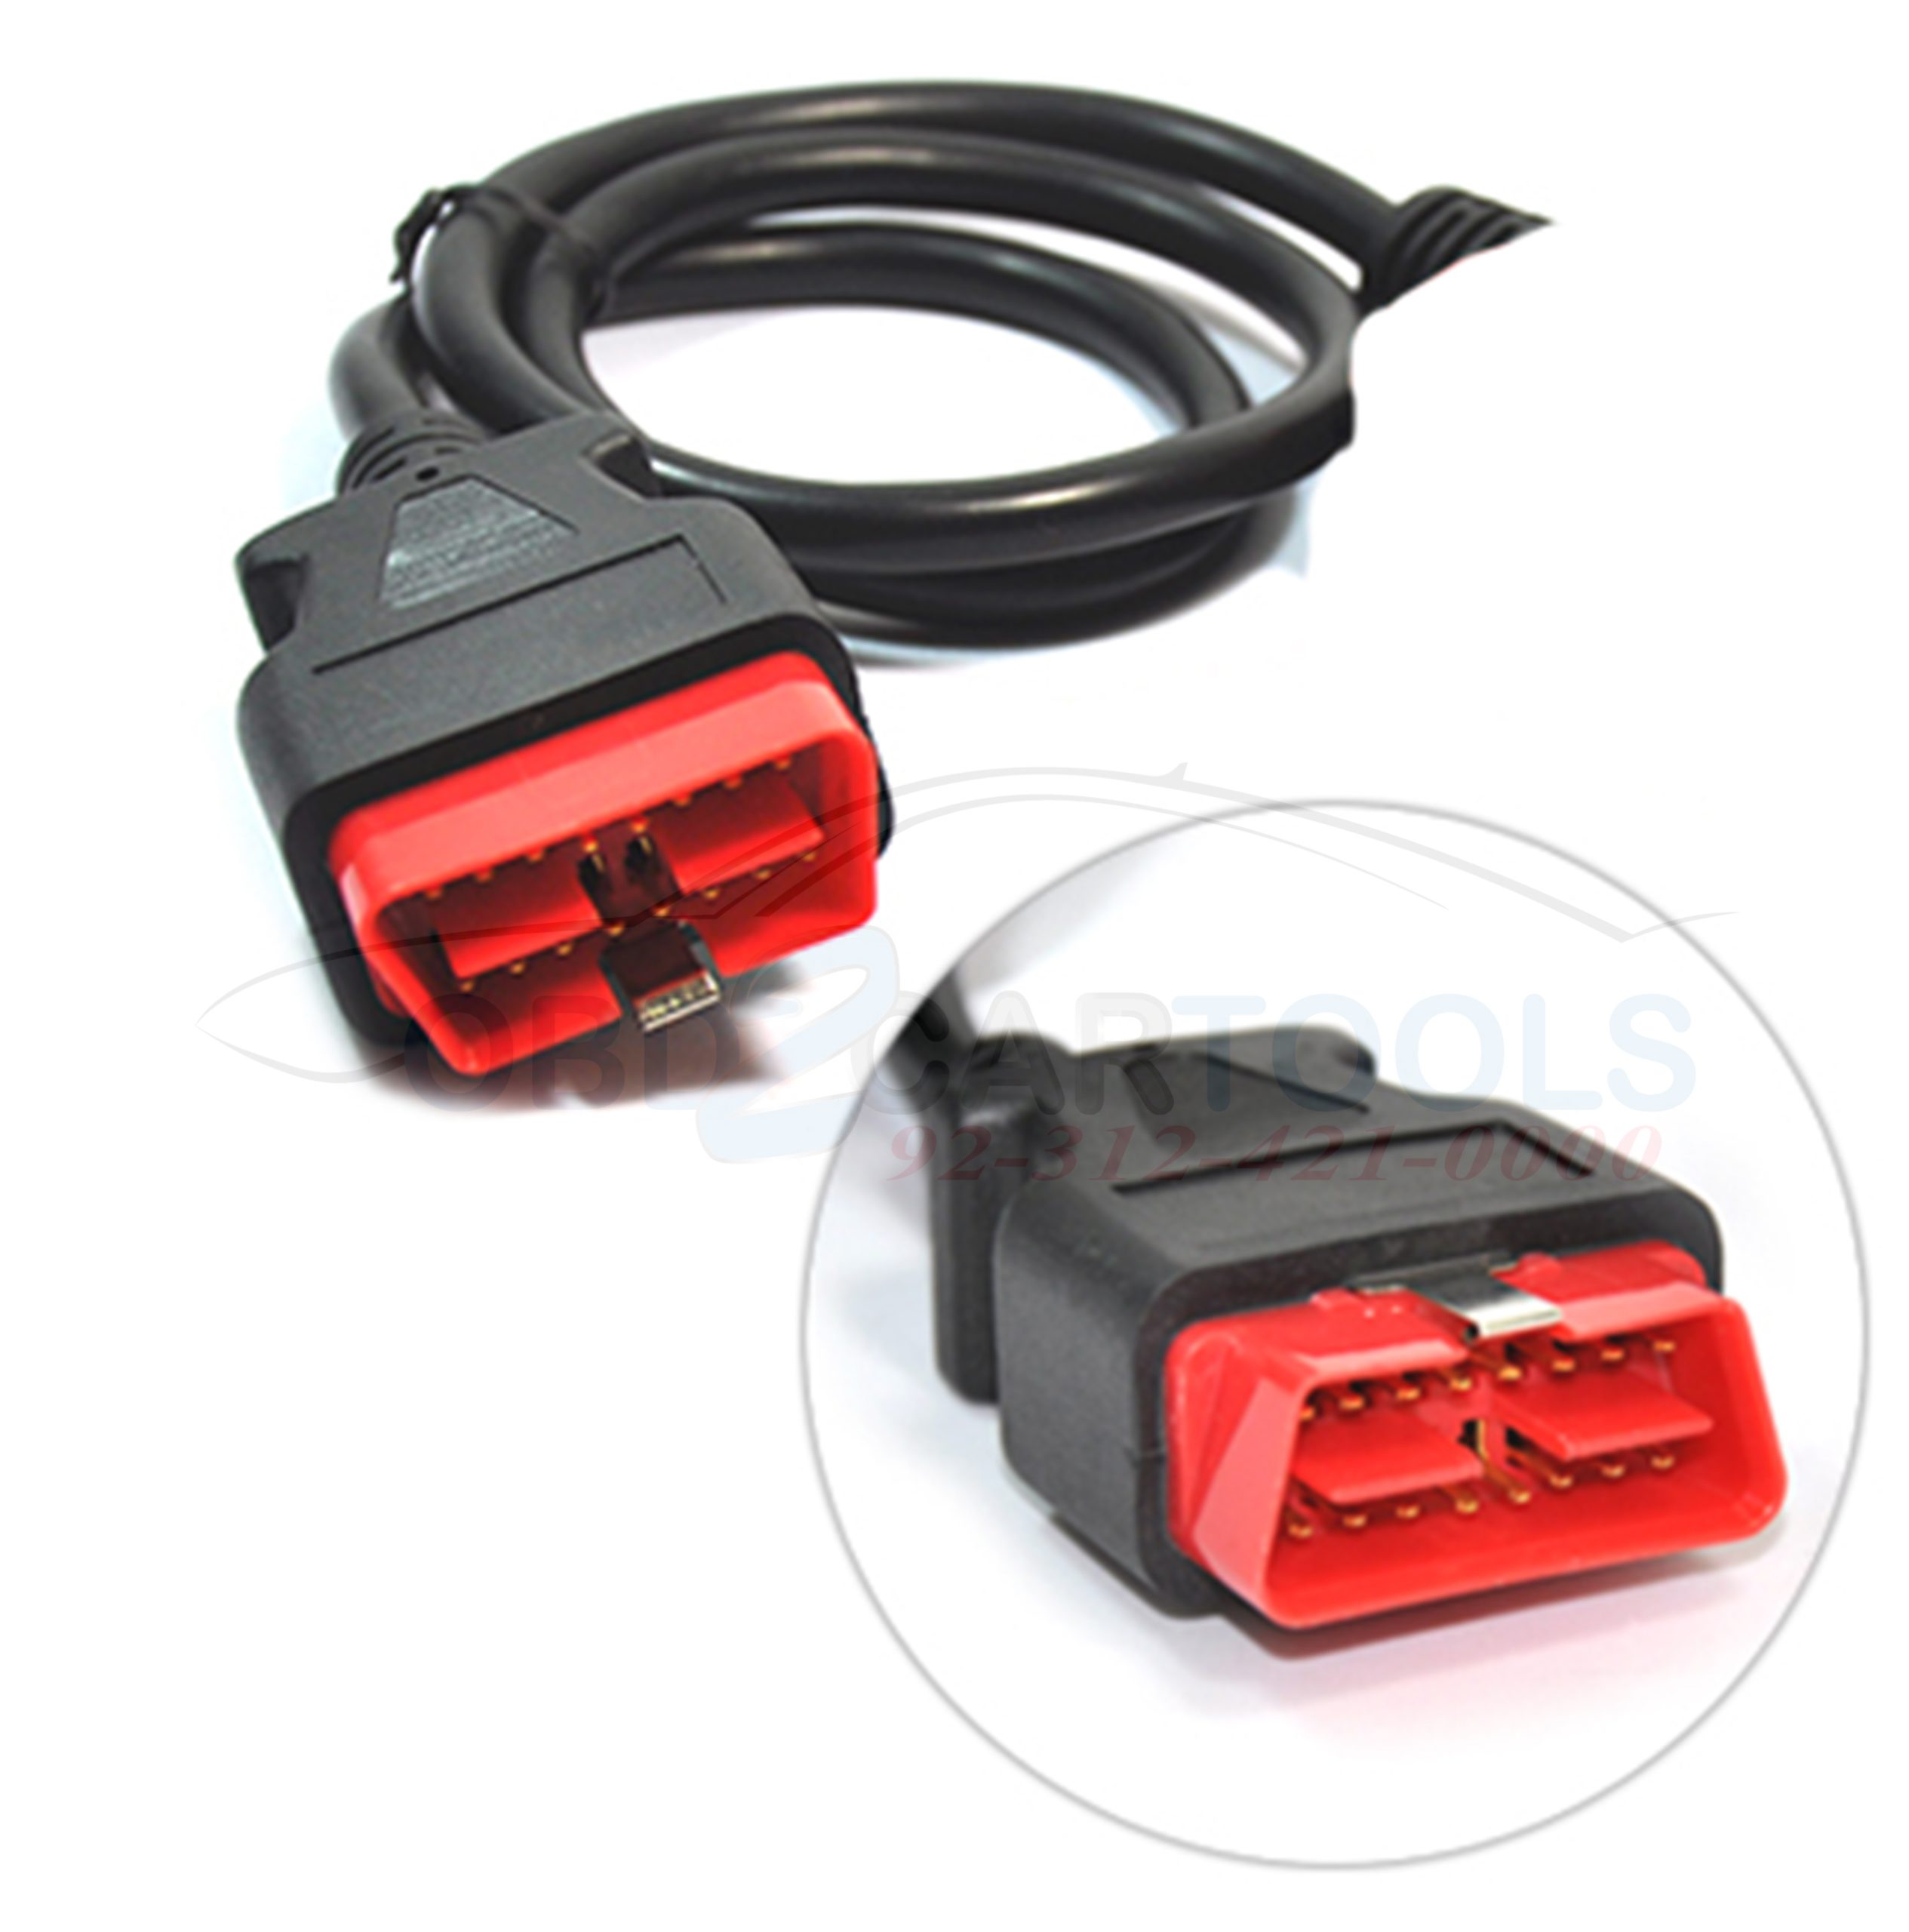 Product image for VDM MAIN CABLE FOR MAIN DEVICE